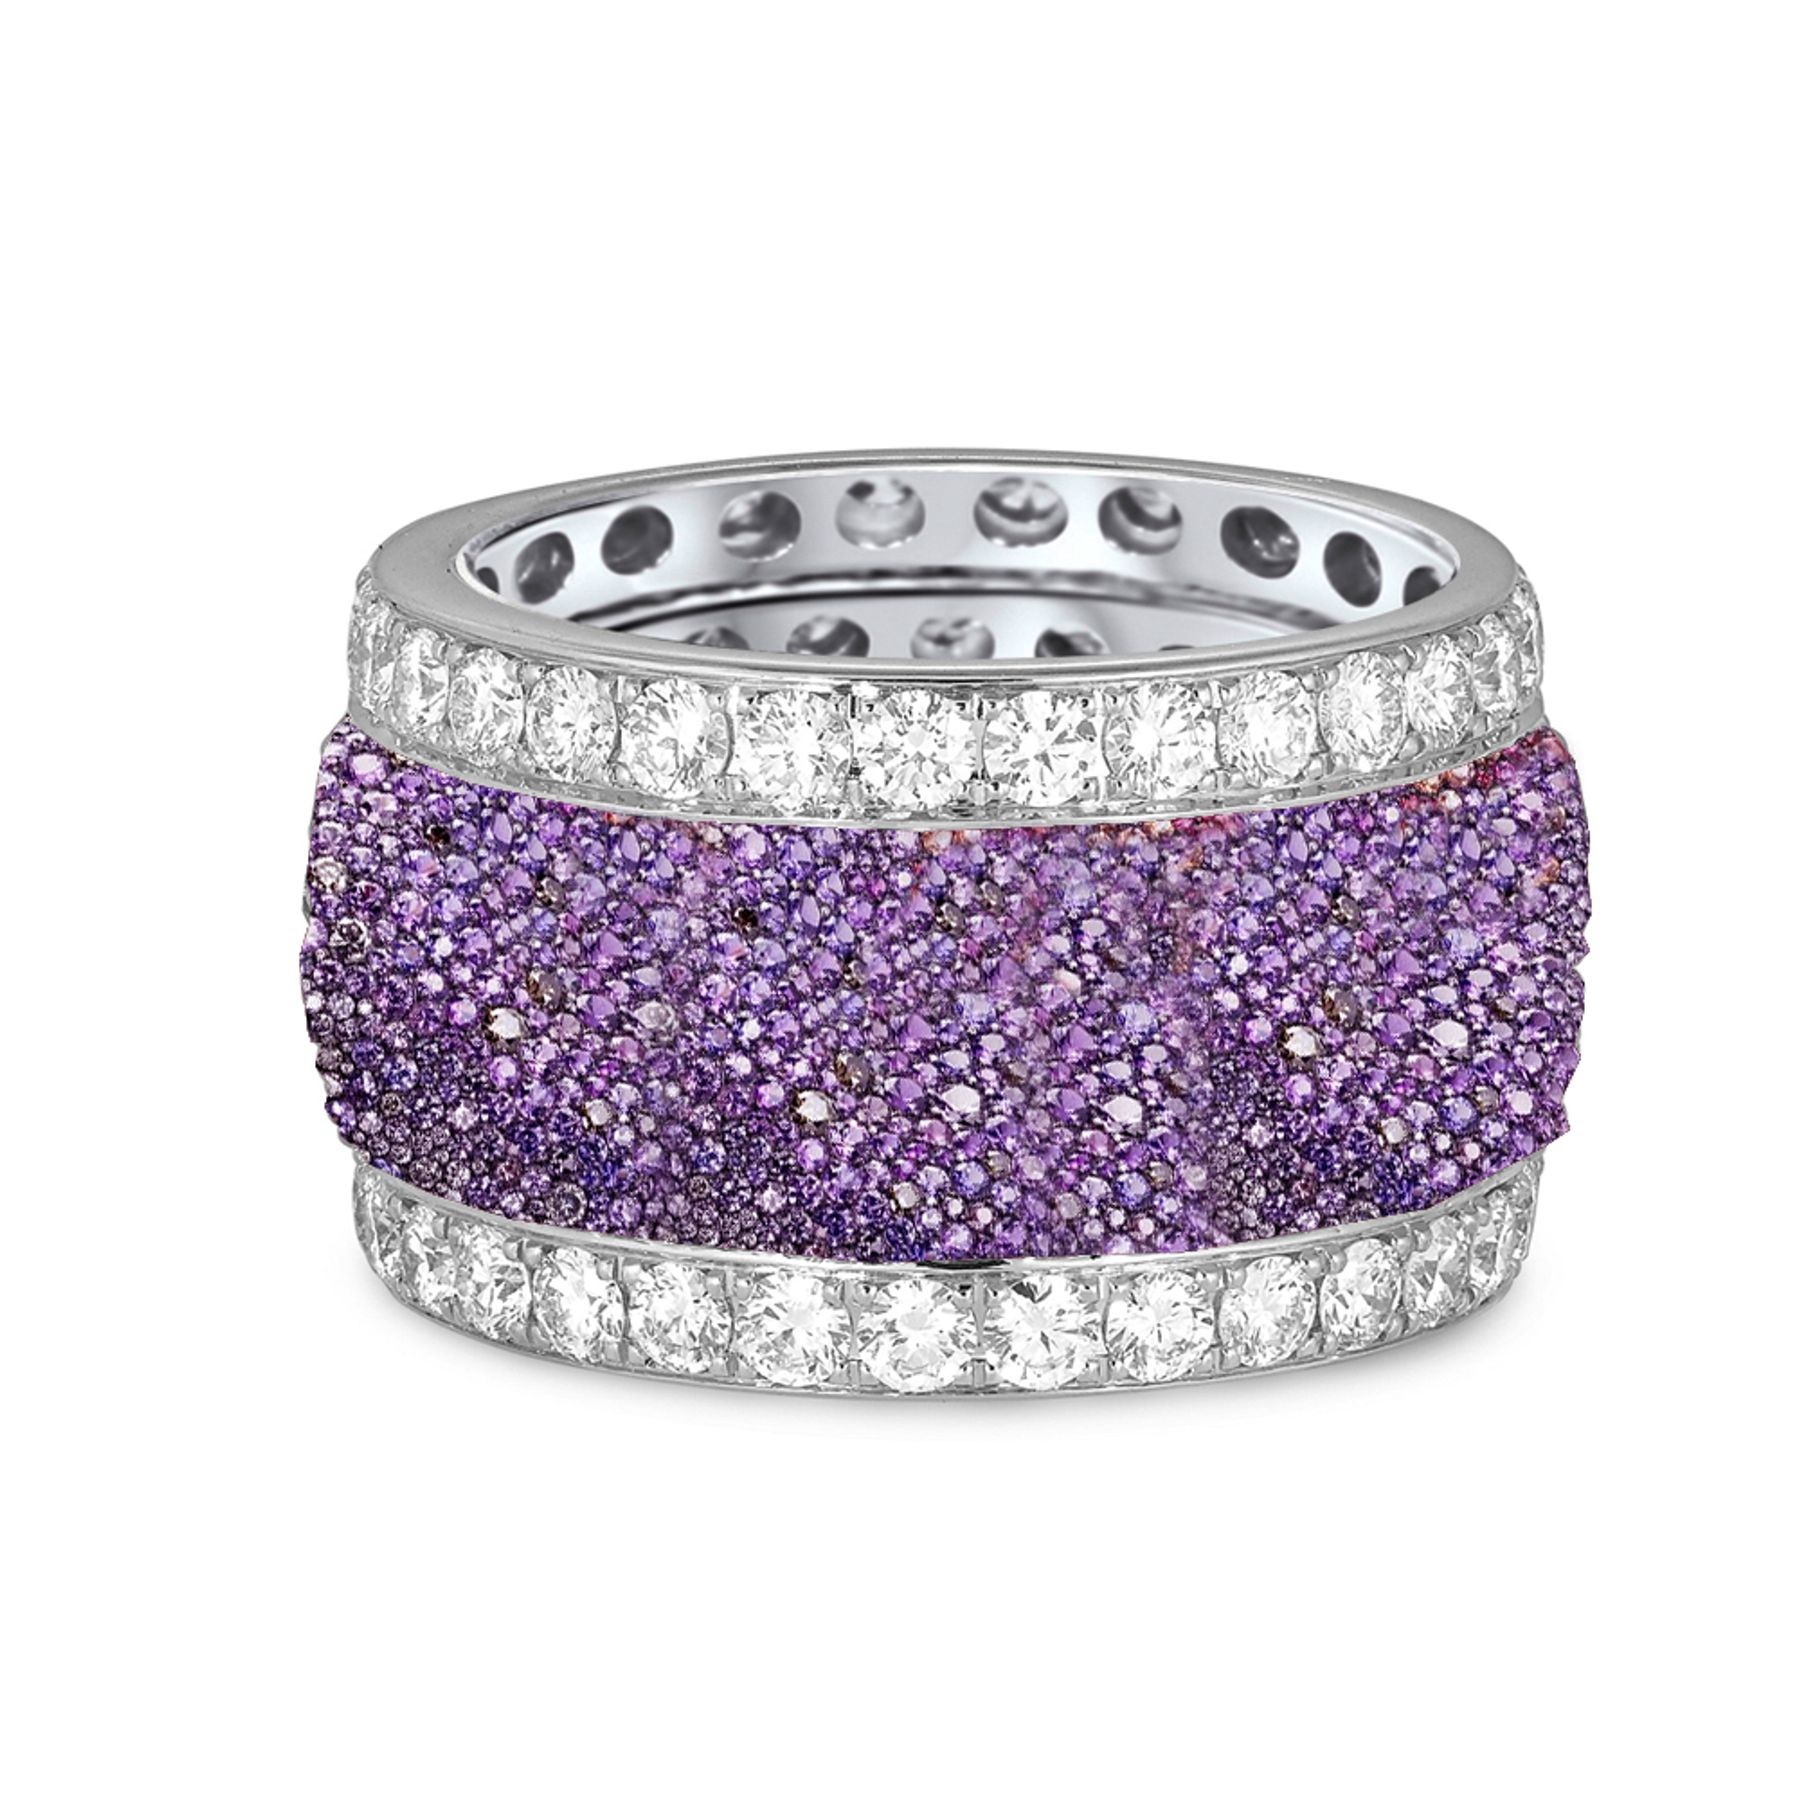 Largest Selection of Diamonds & Colored Stones Eternity Band Rings Available in Gold or Platinum